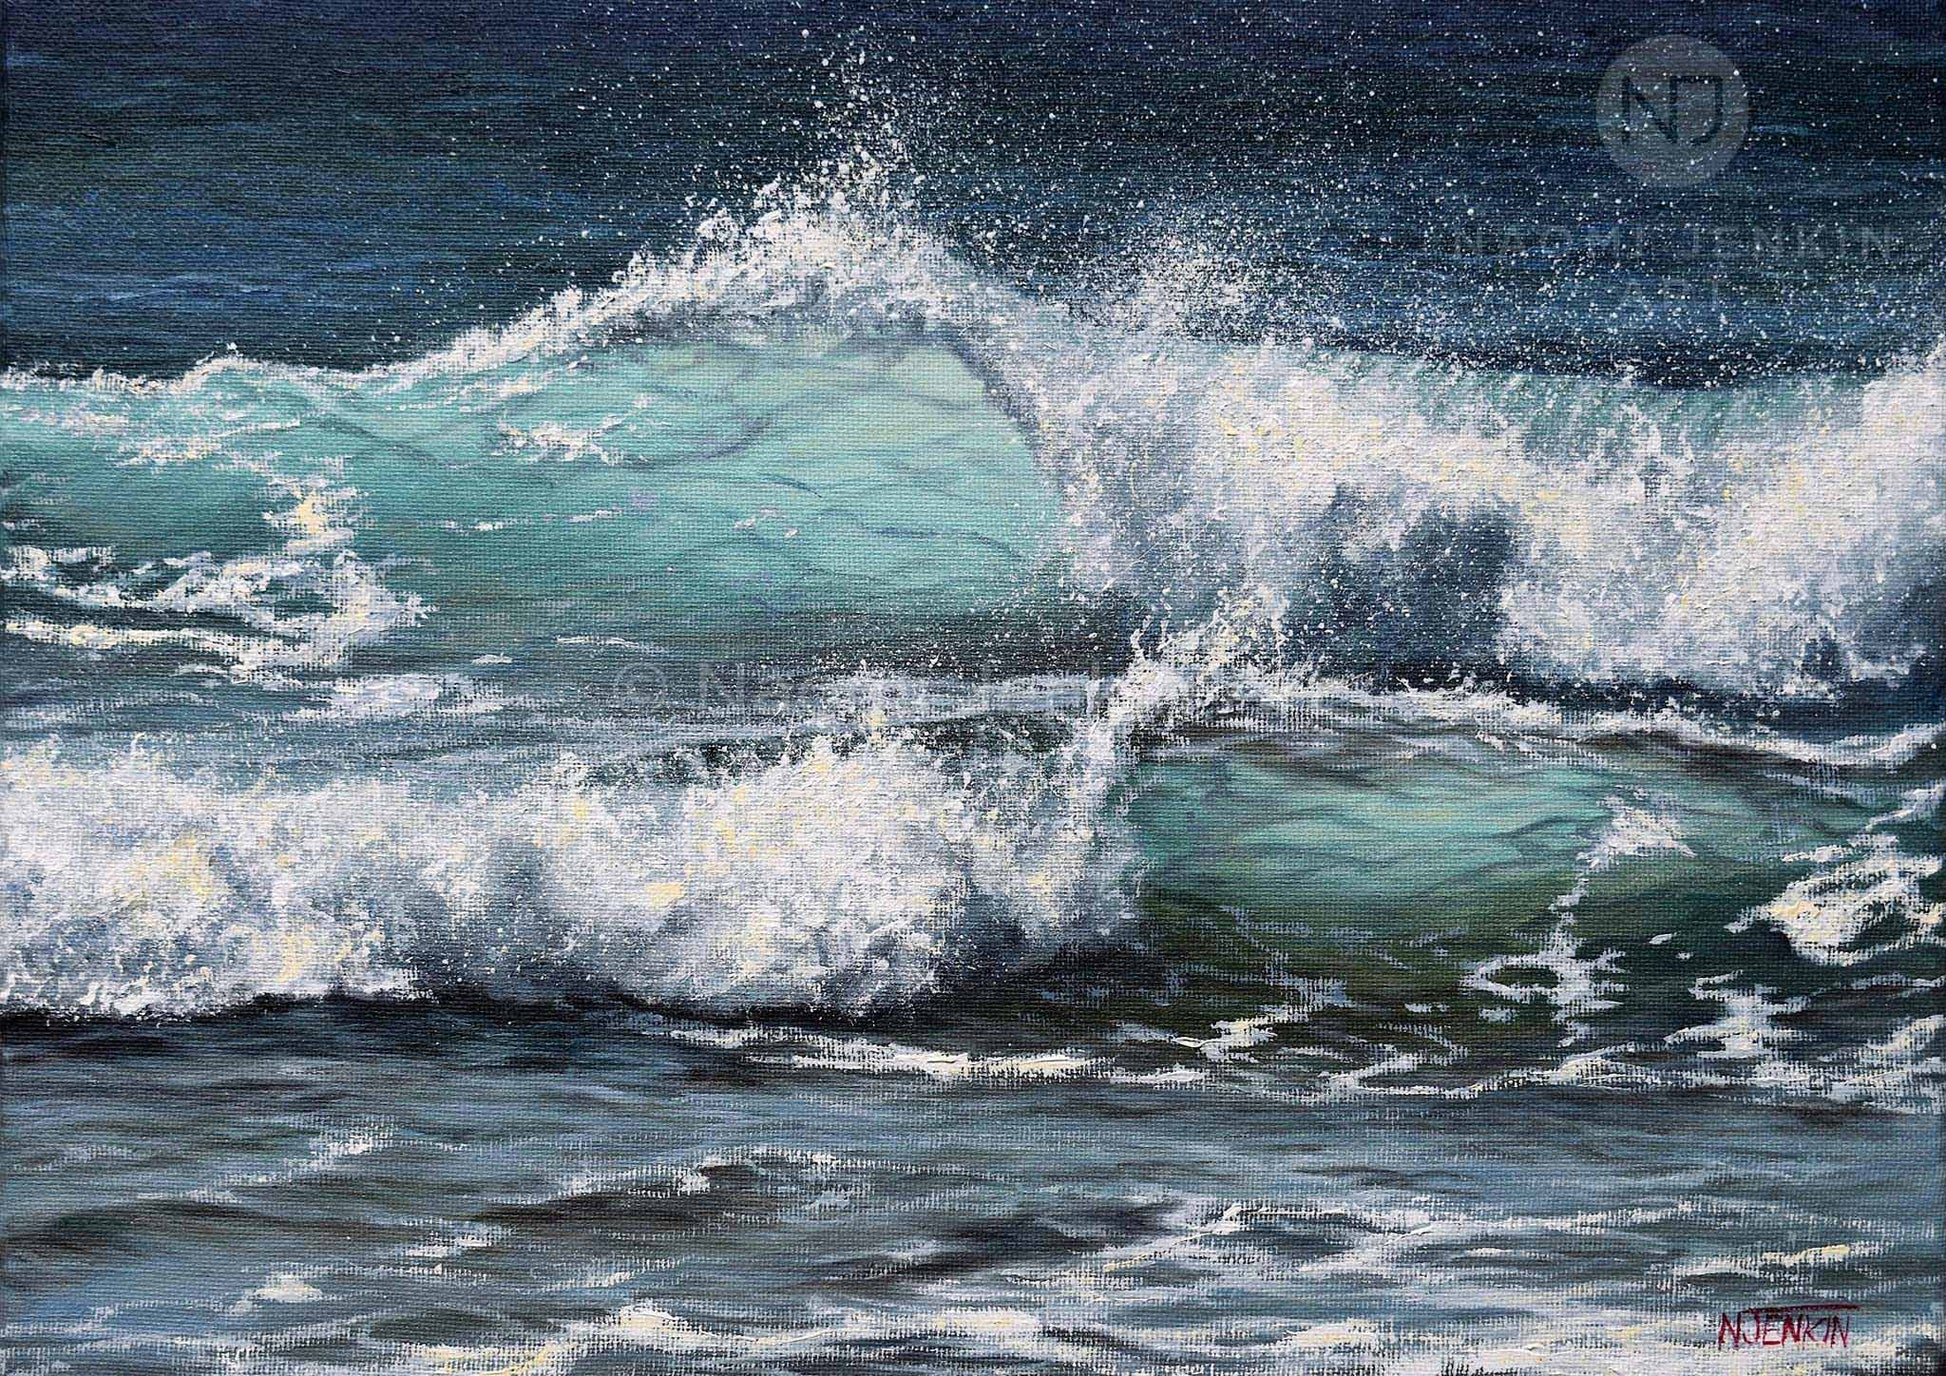 Close up of a breaking wave painting taken from the print 'Sunlit Surf'